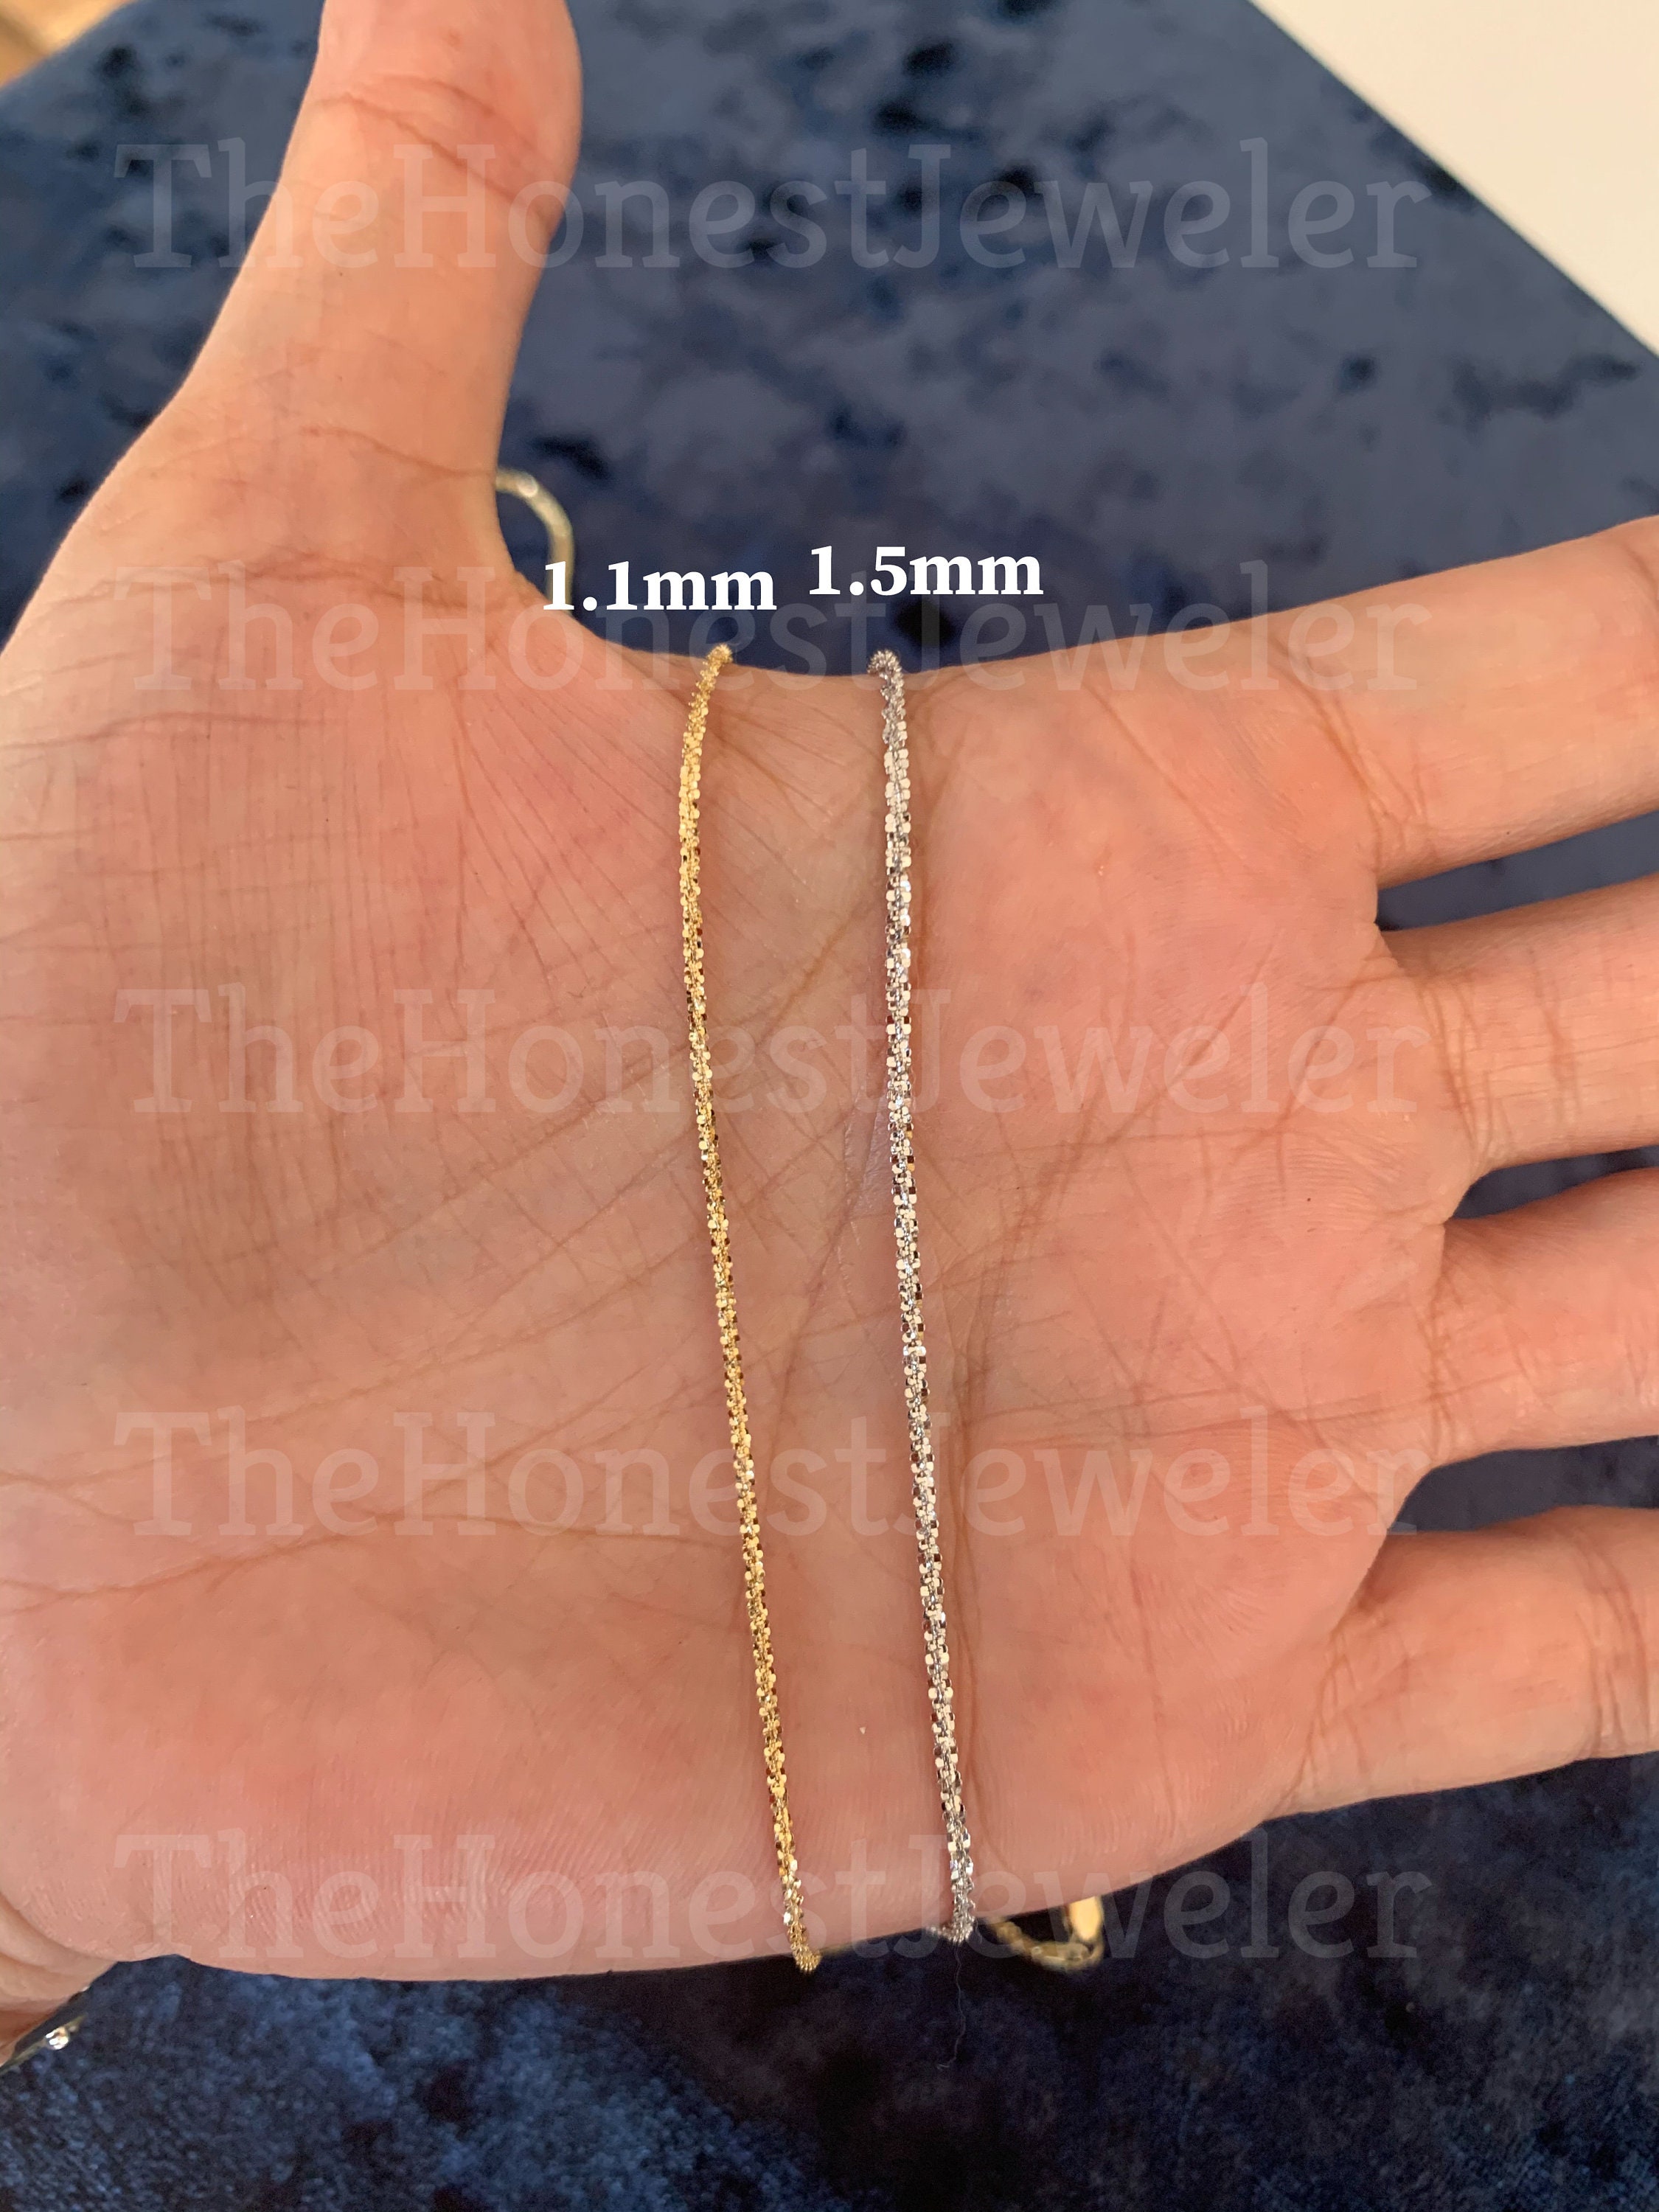  TheHonestJeweler 14k Solid Gold Extendable Box chain